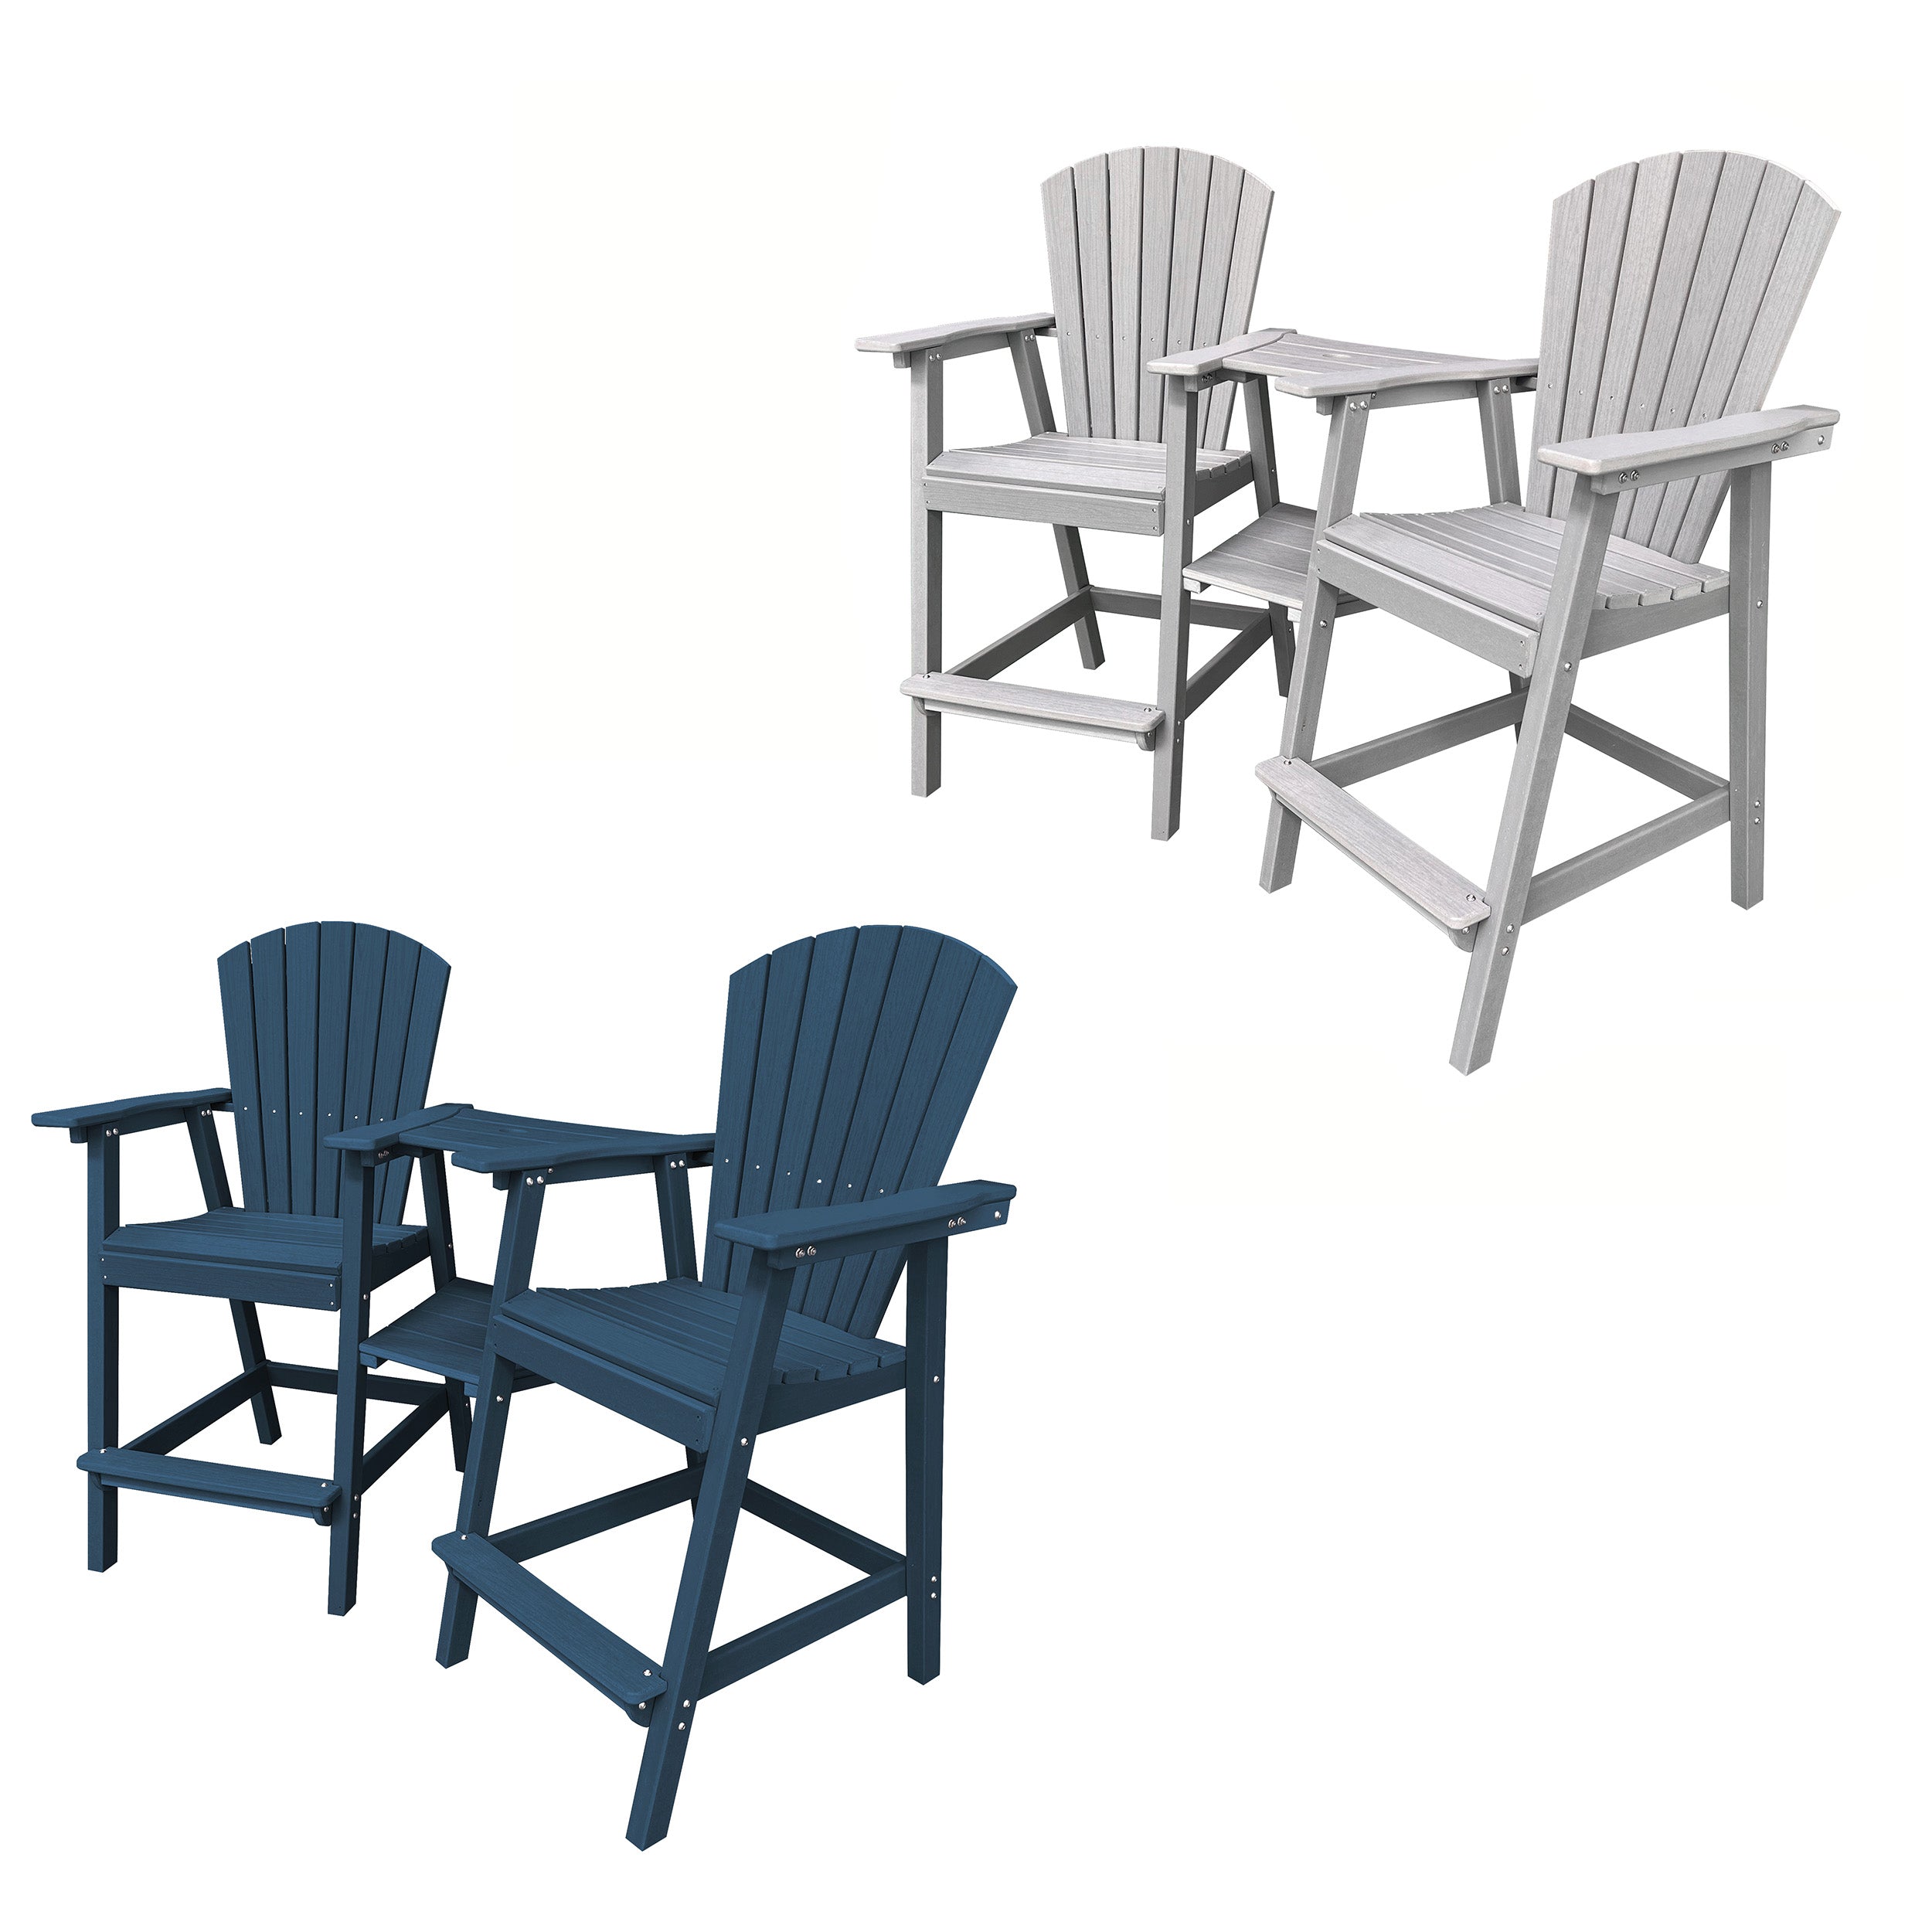 Set of 2 Tall Adirondack Chairs with Connecting Double Tables, Umbrella capable